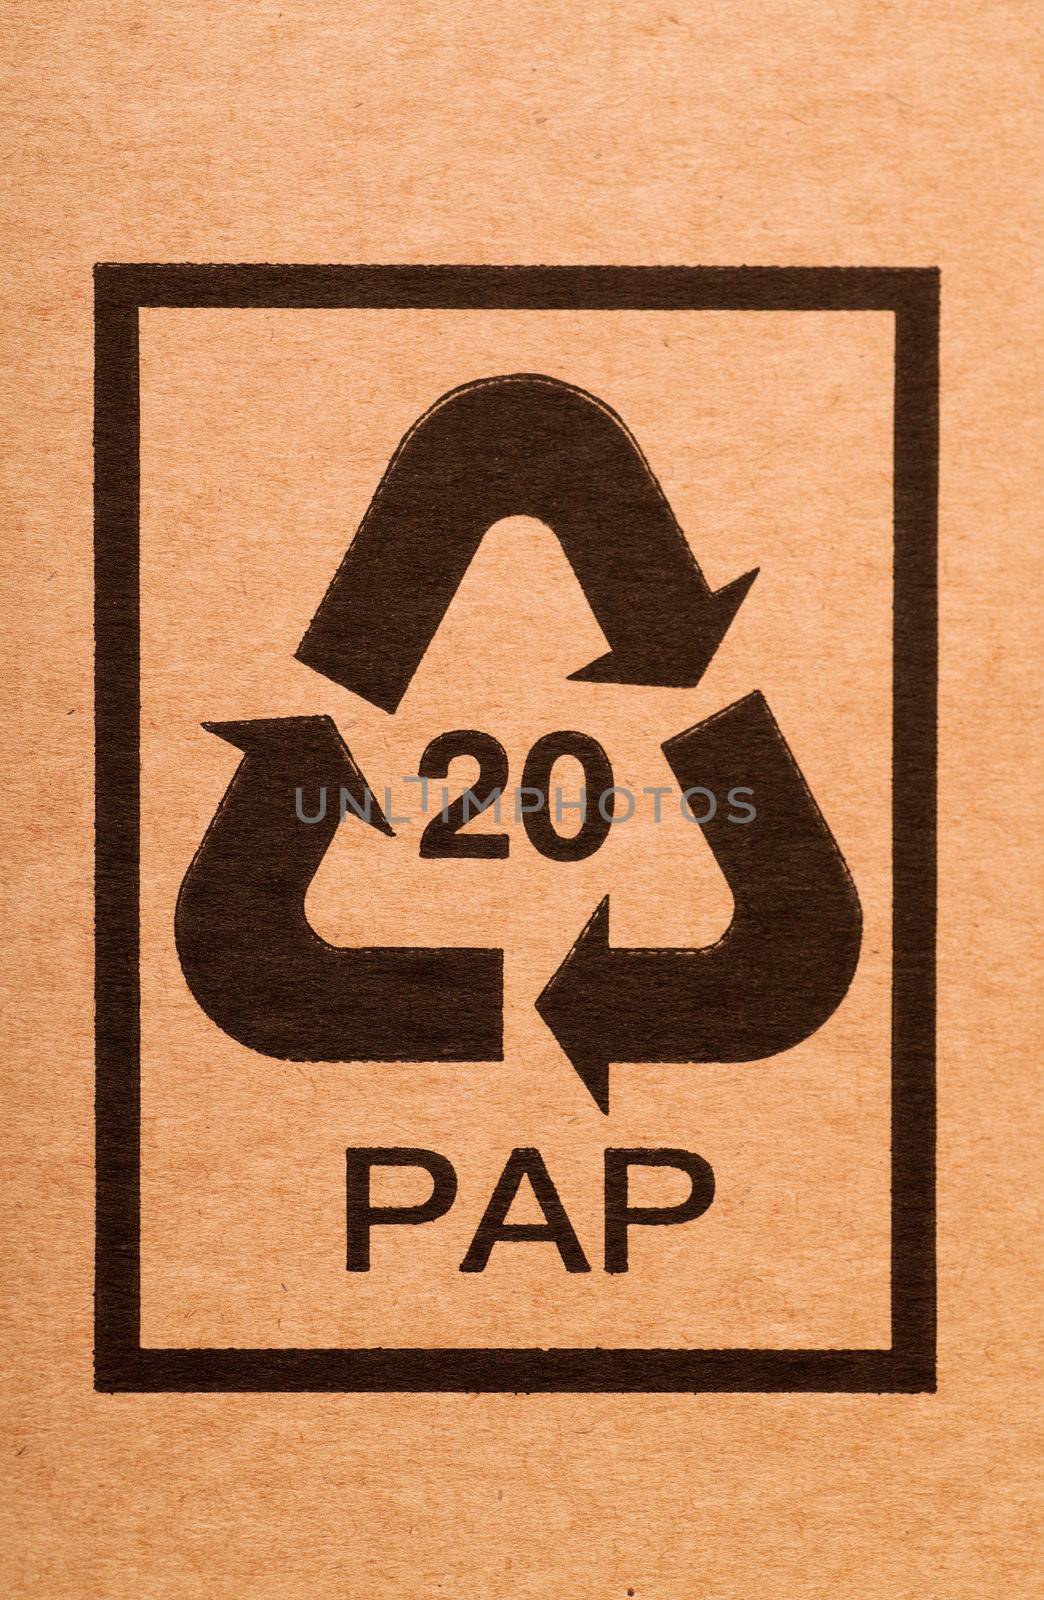 Recycling code identifying corrugated fiberboard material